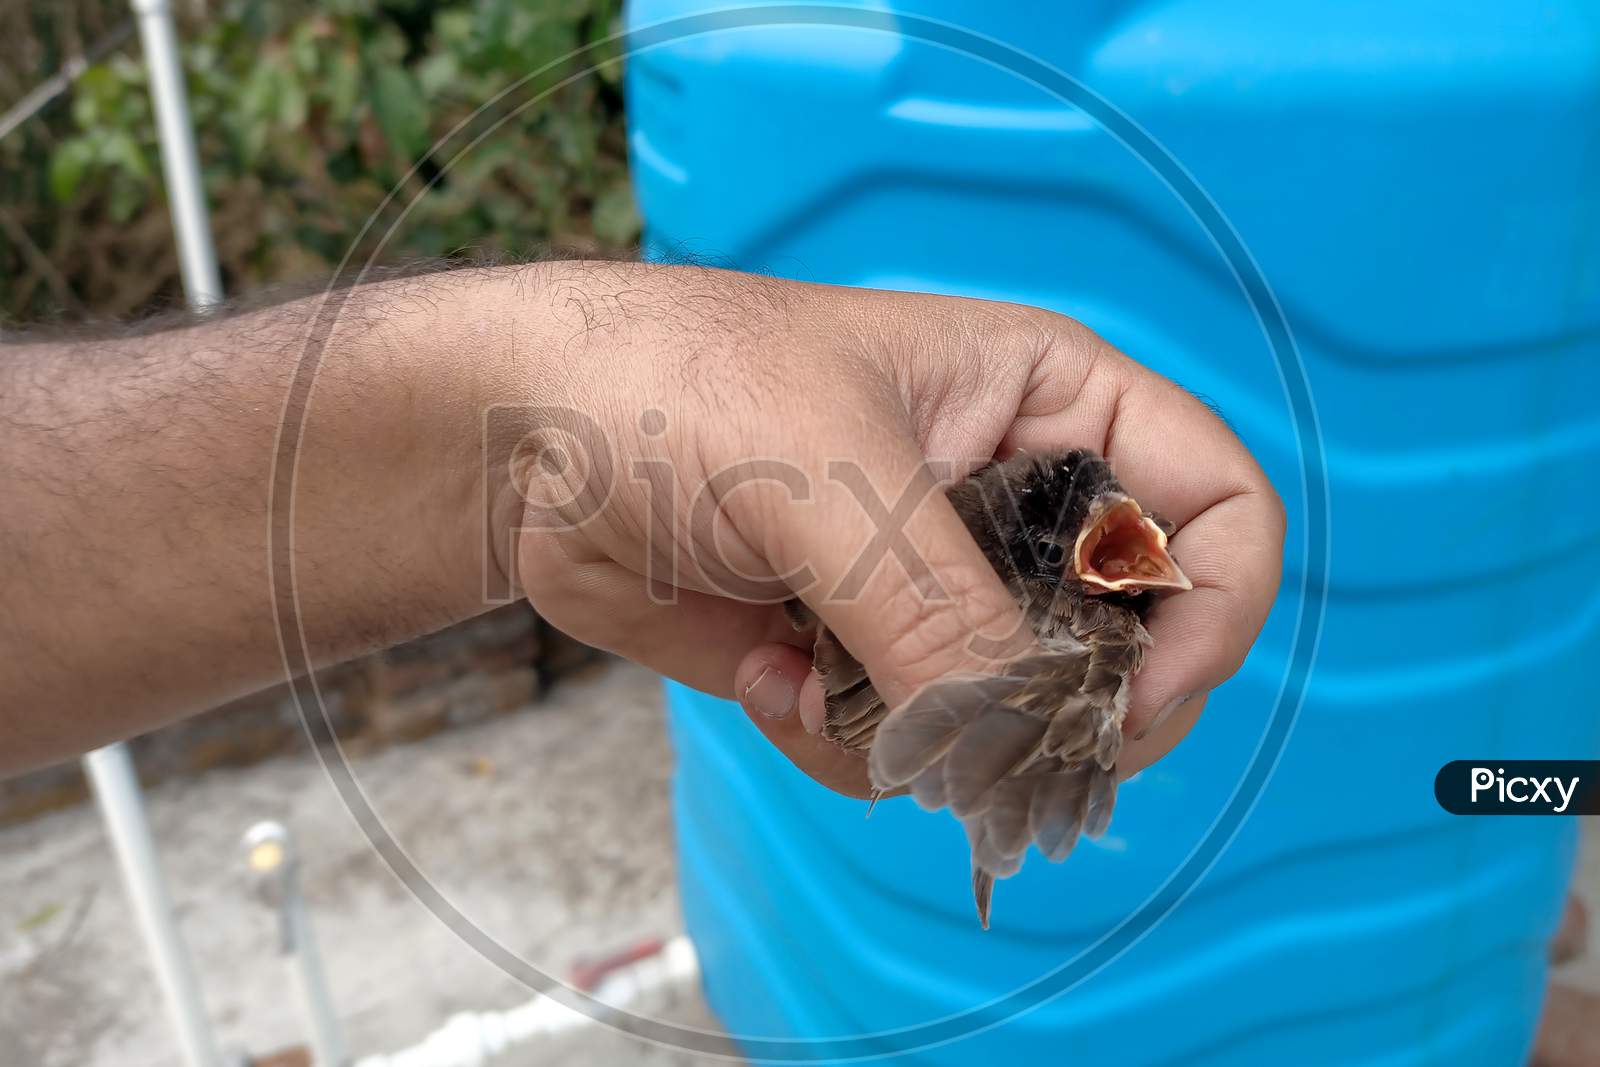 A Displaced Black Plumage Chick Is Being Rescued By The Hand